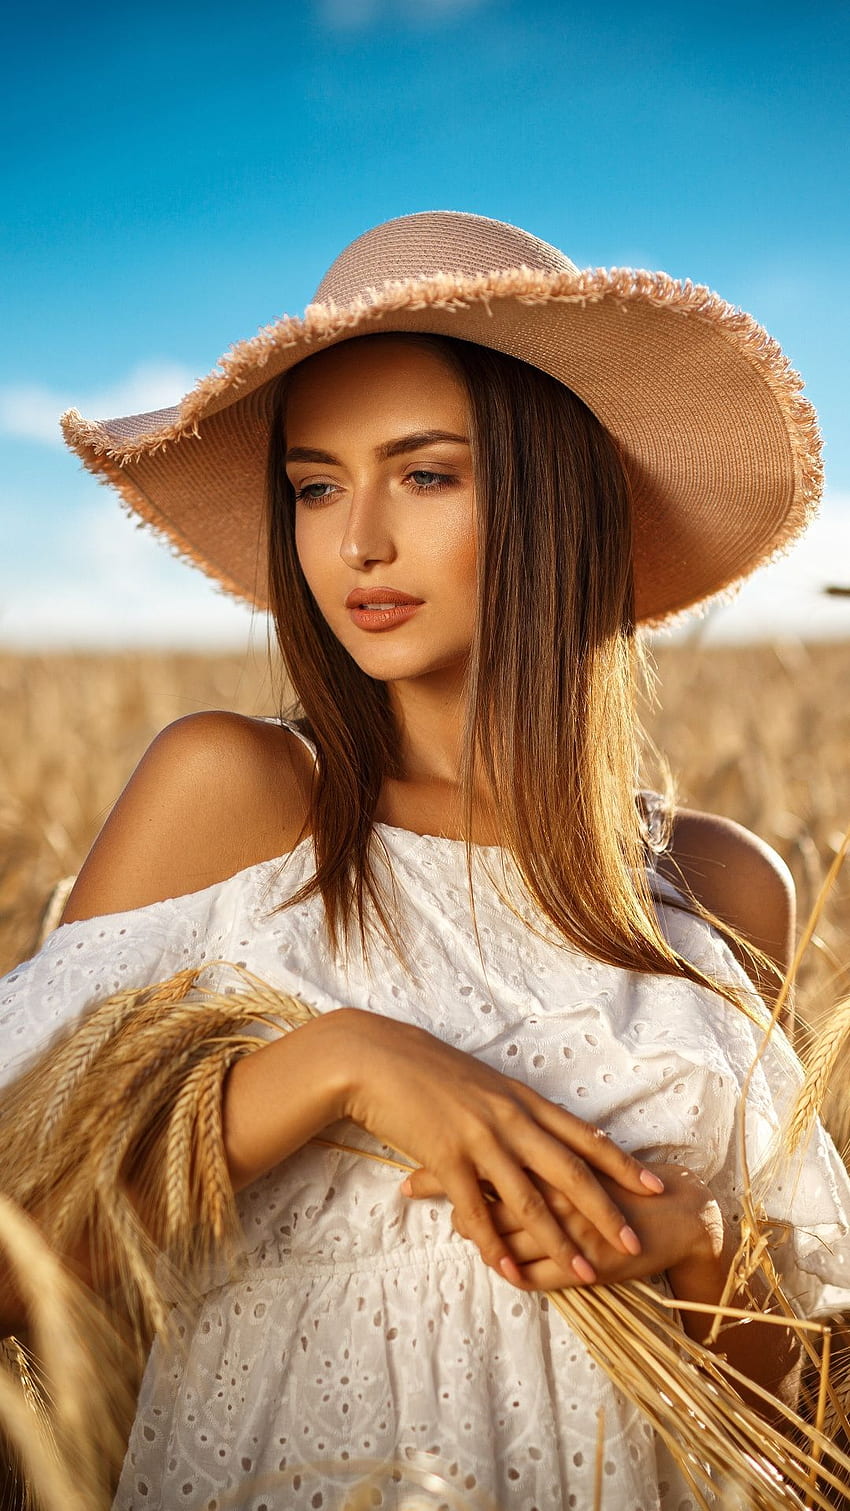 1920x1080px 1080p Free Download Beautiful Woman Straw Hat Outdoor Wheat Farm Graphy